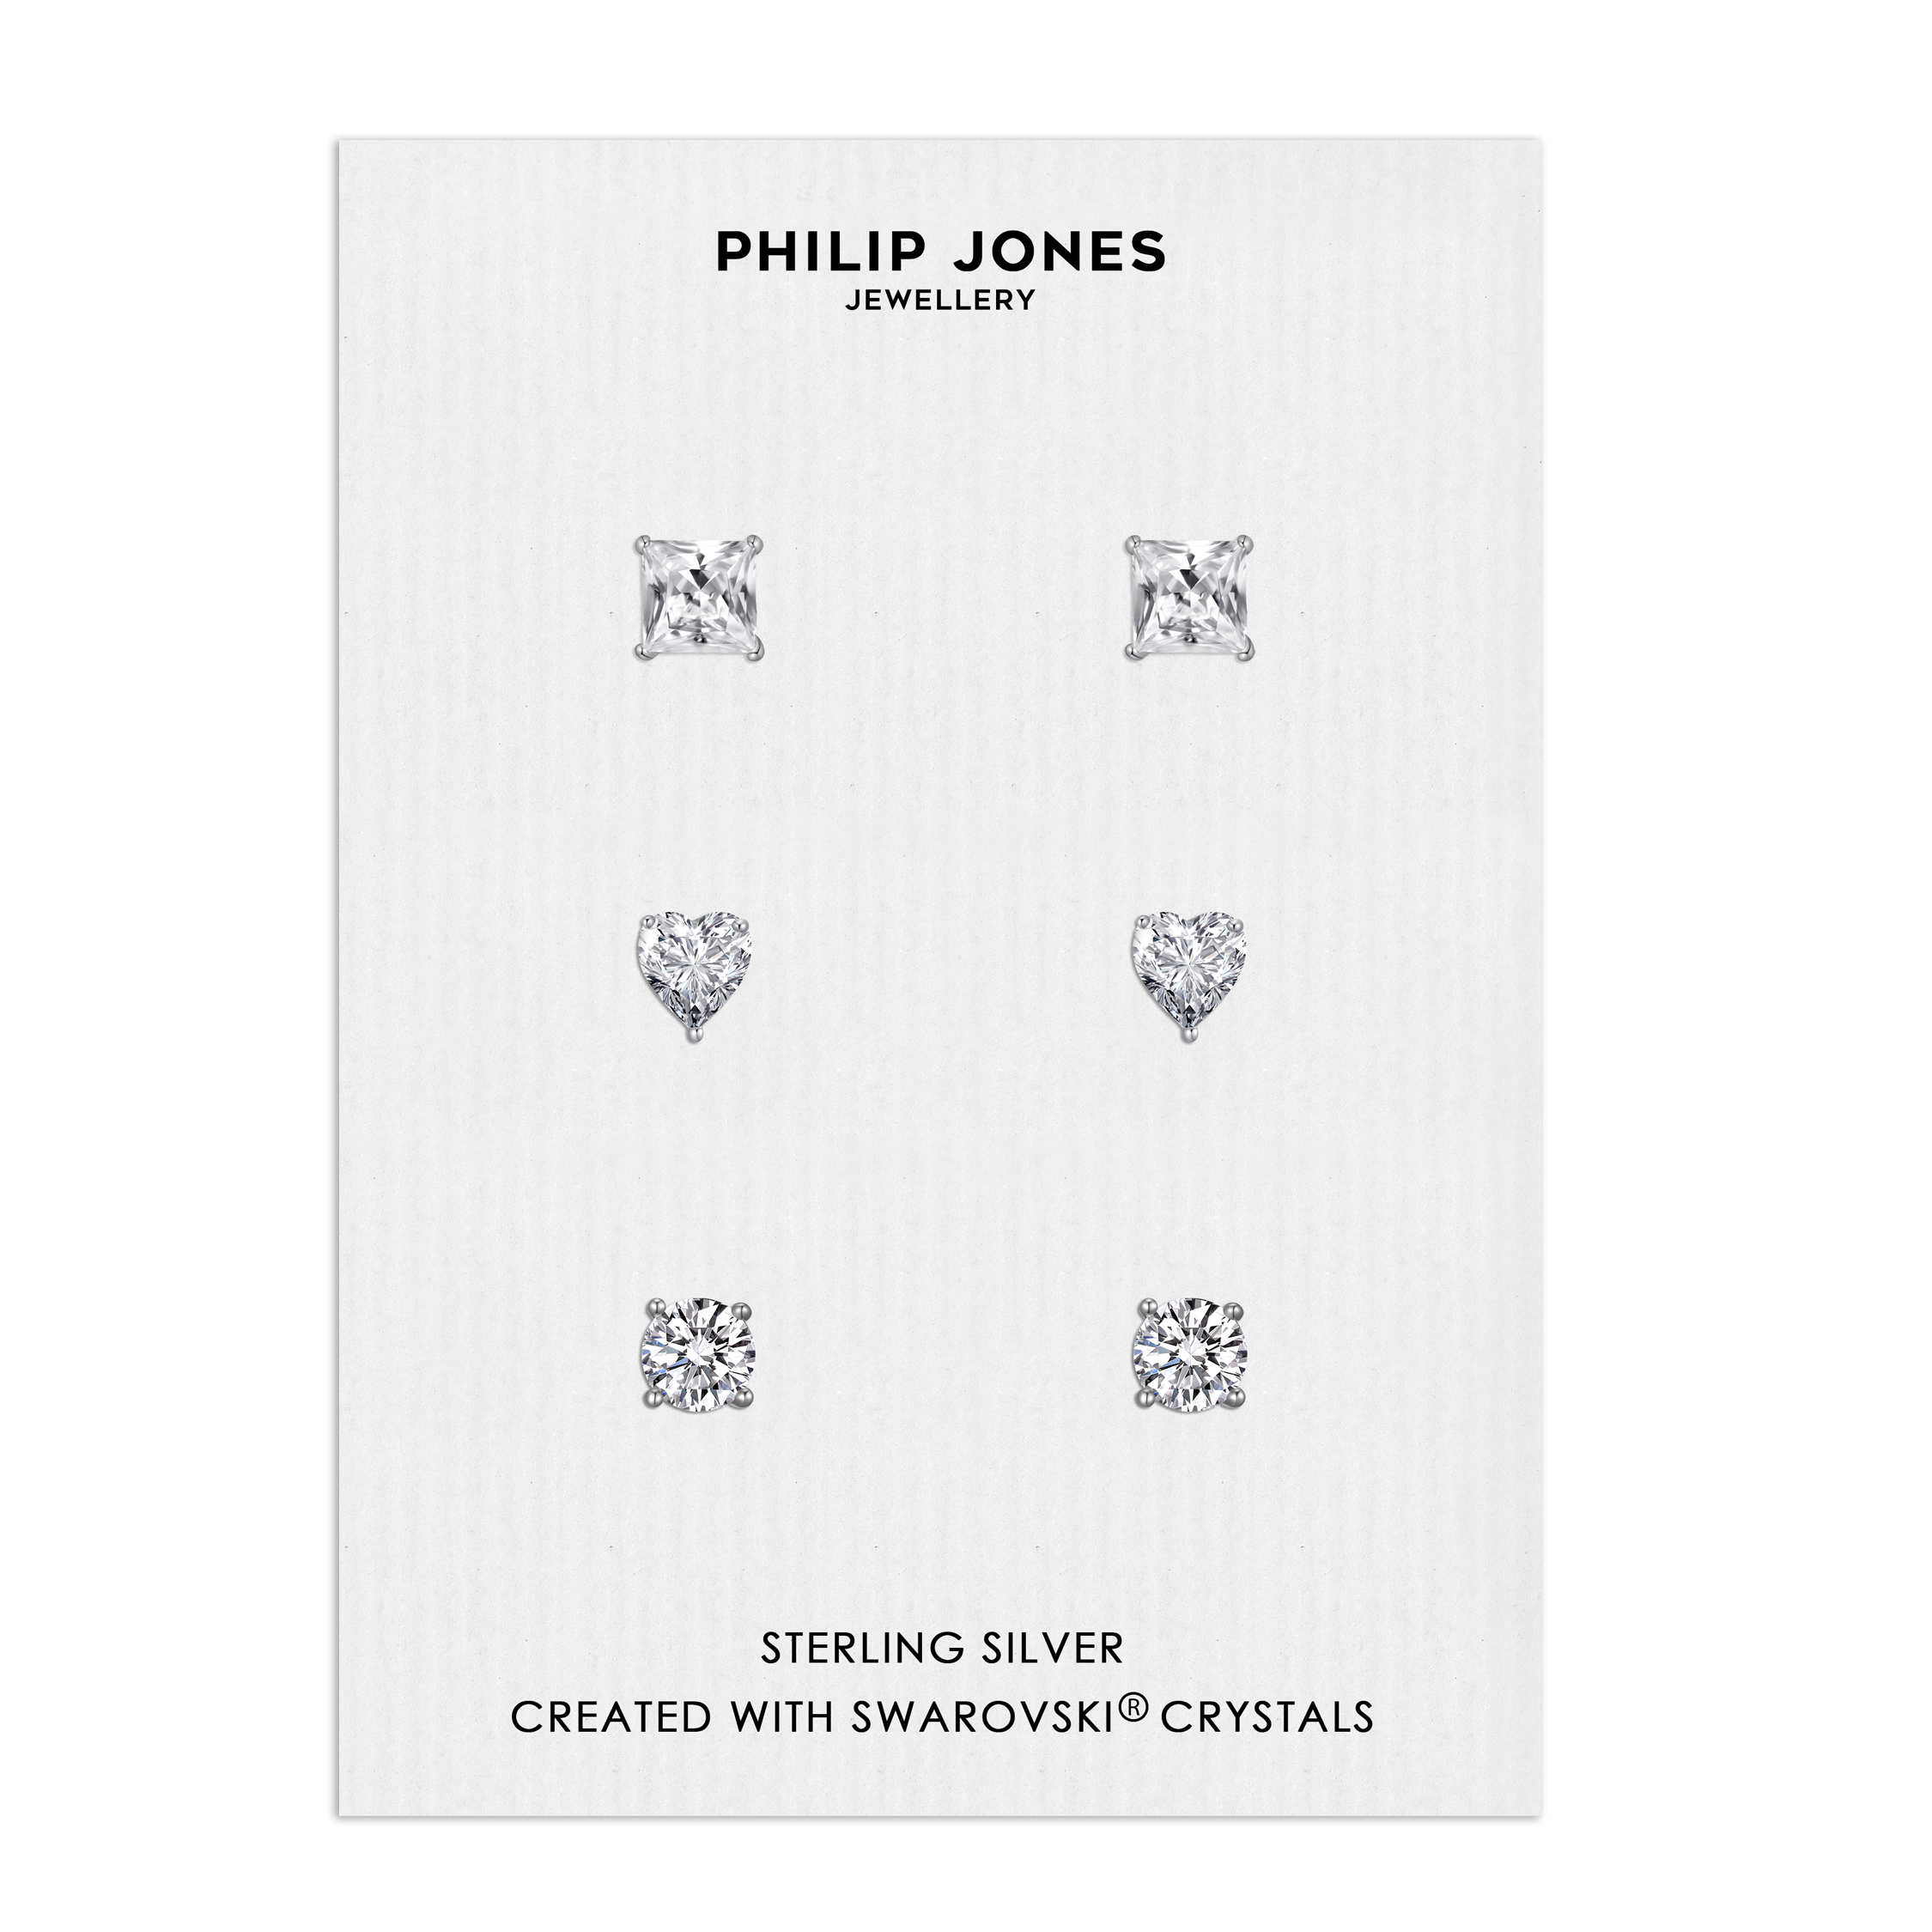 3 Pairs of Sterling Silver Shaped Earrings Created with Zircondia® Crystals by Philip Jones Jewellery